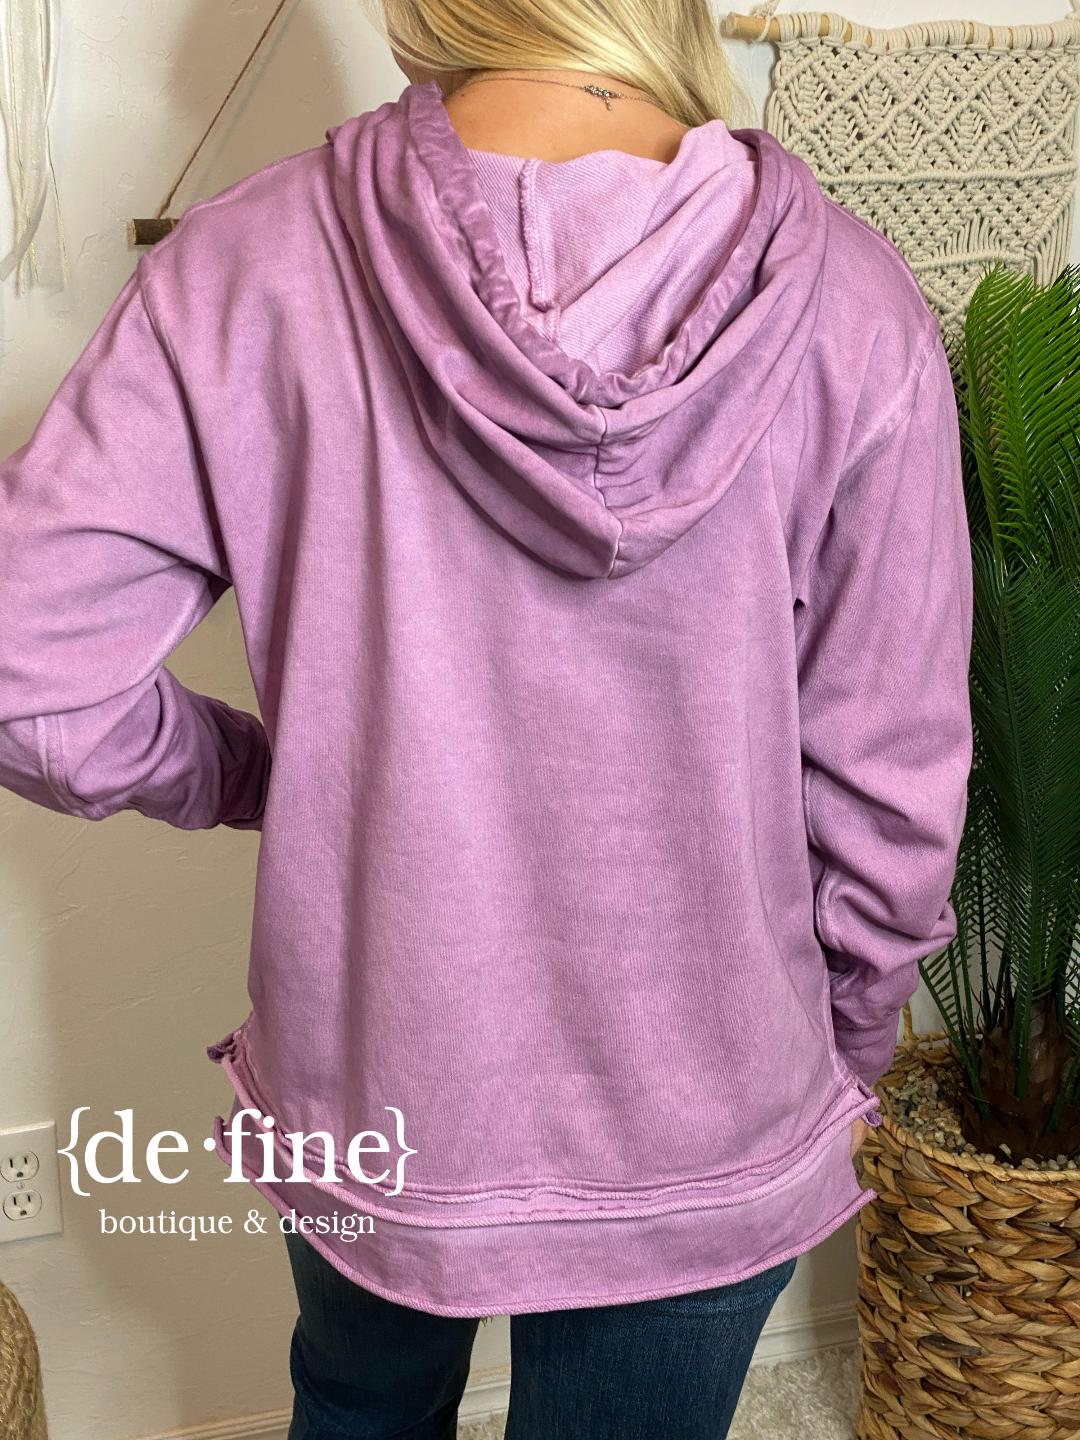 My Oh My Mineral Washed Hoodie in Lavender and Seafoam